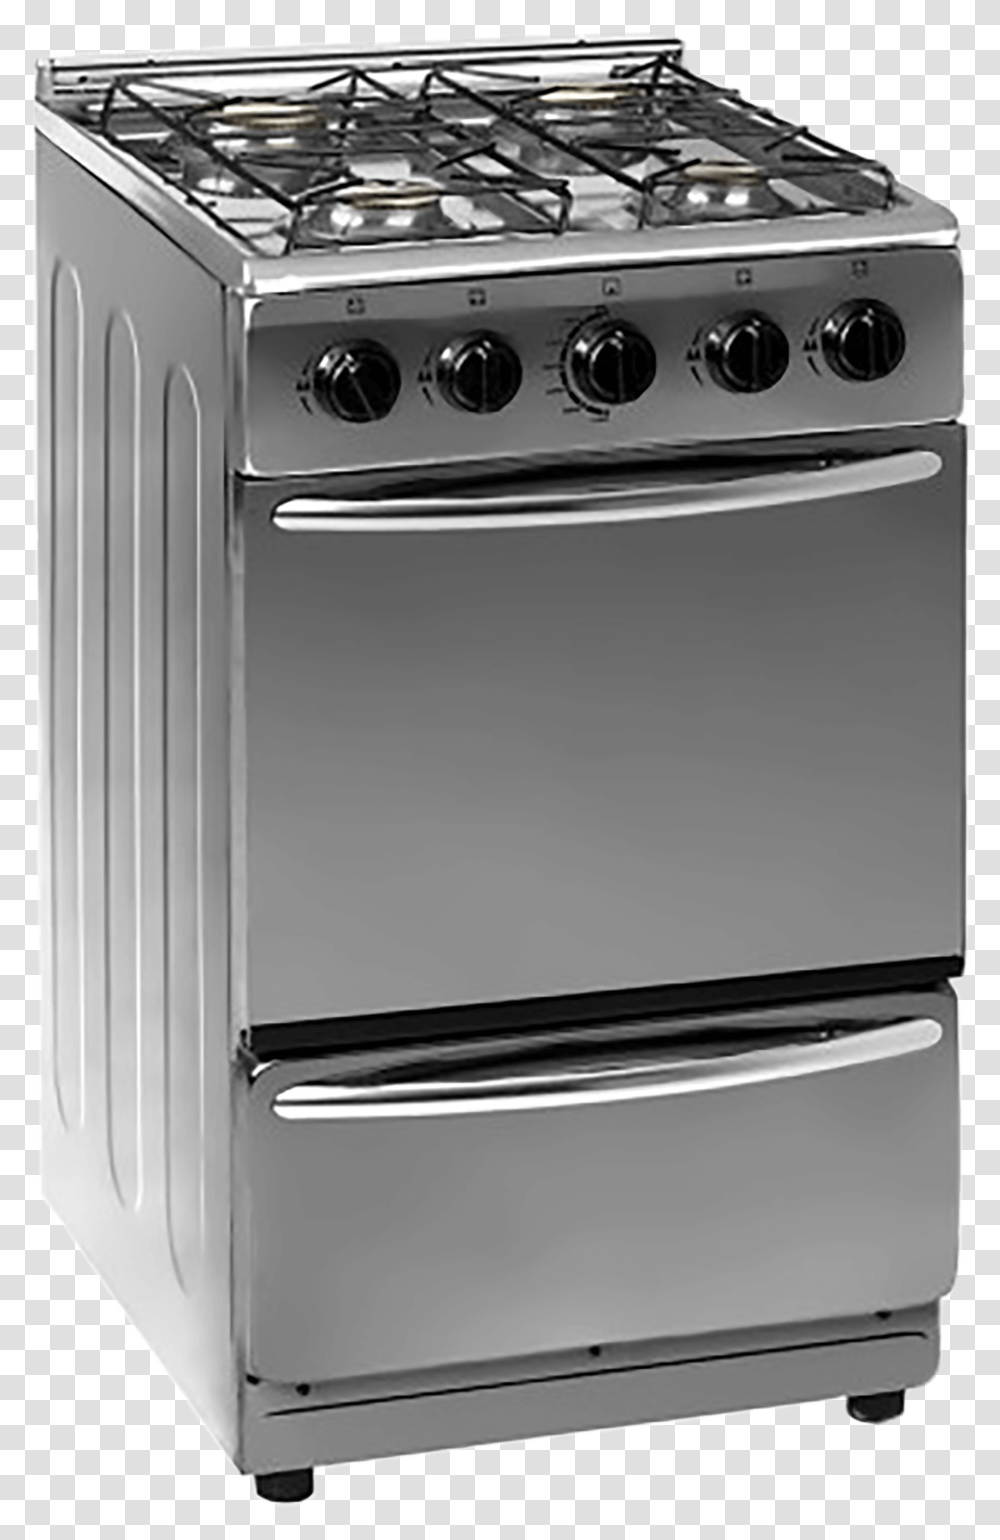 Burner Stainless Steel Gas Stove, Appliance, Oven, Cooker, Refrigerator Transparent Png